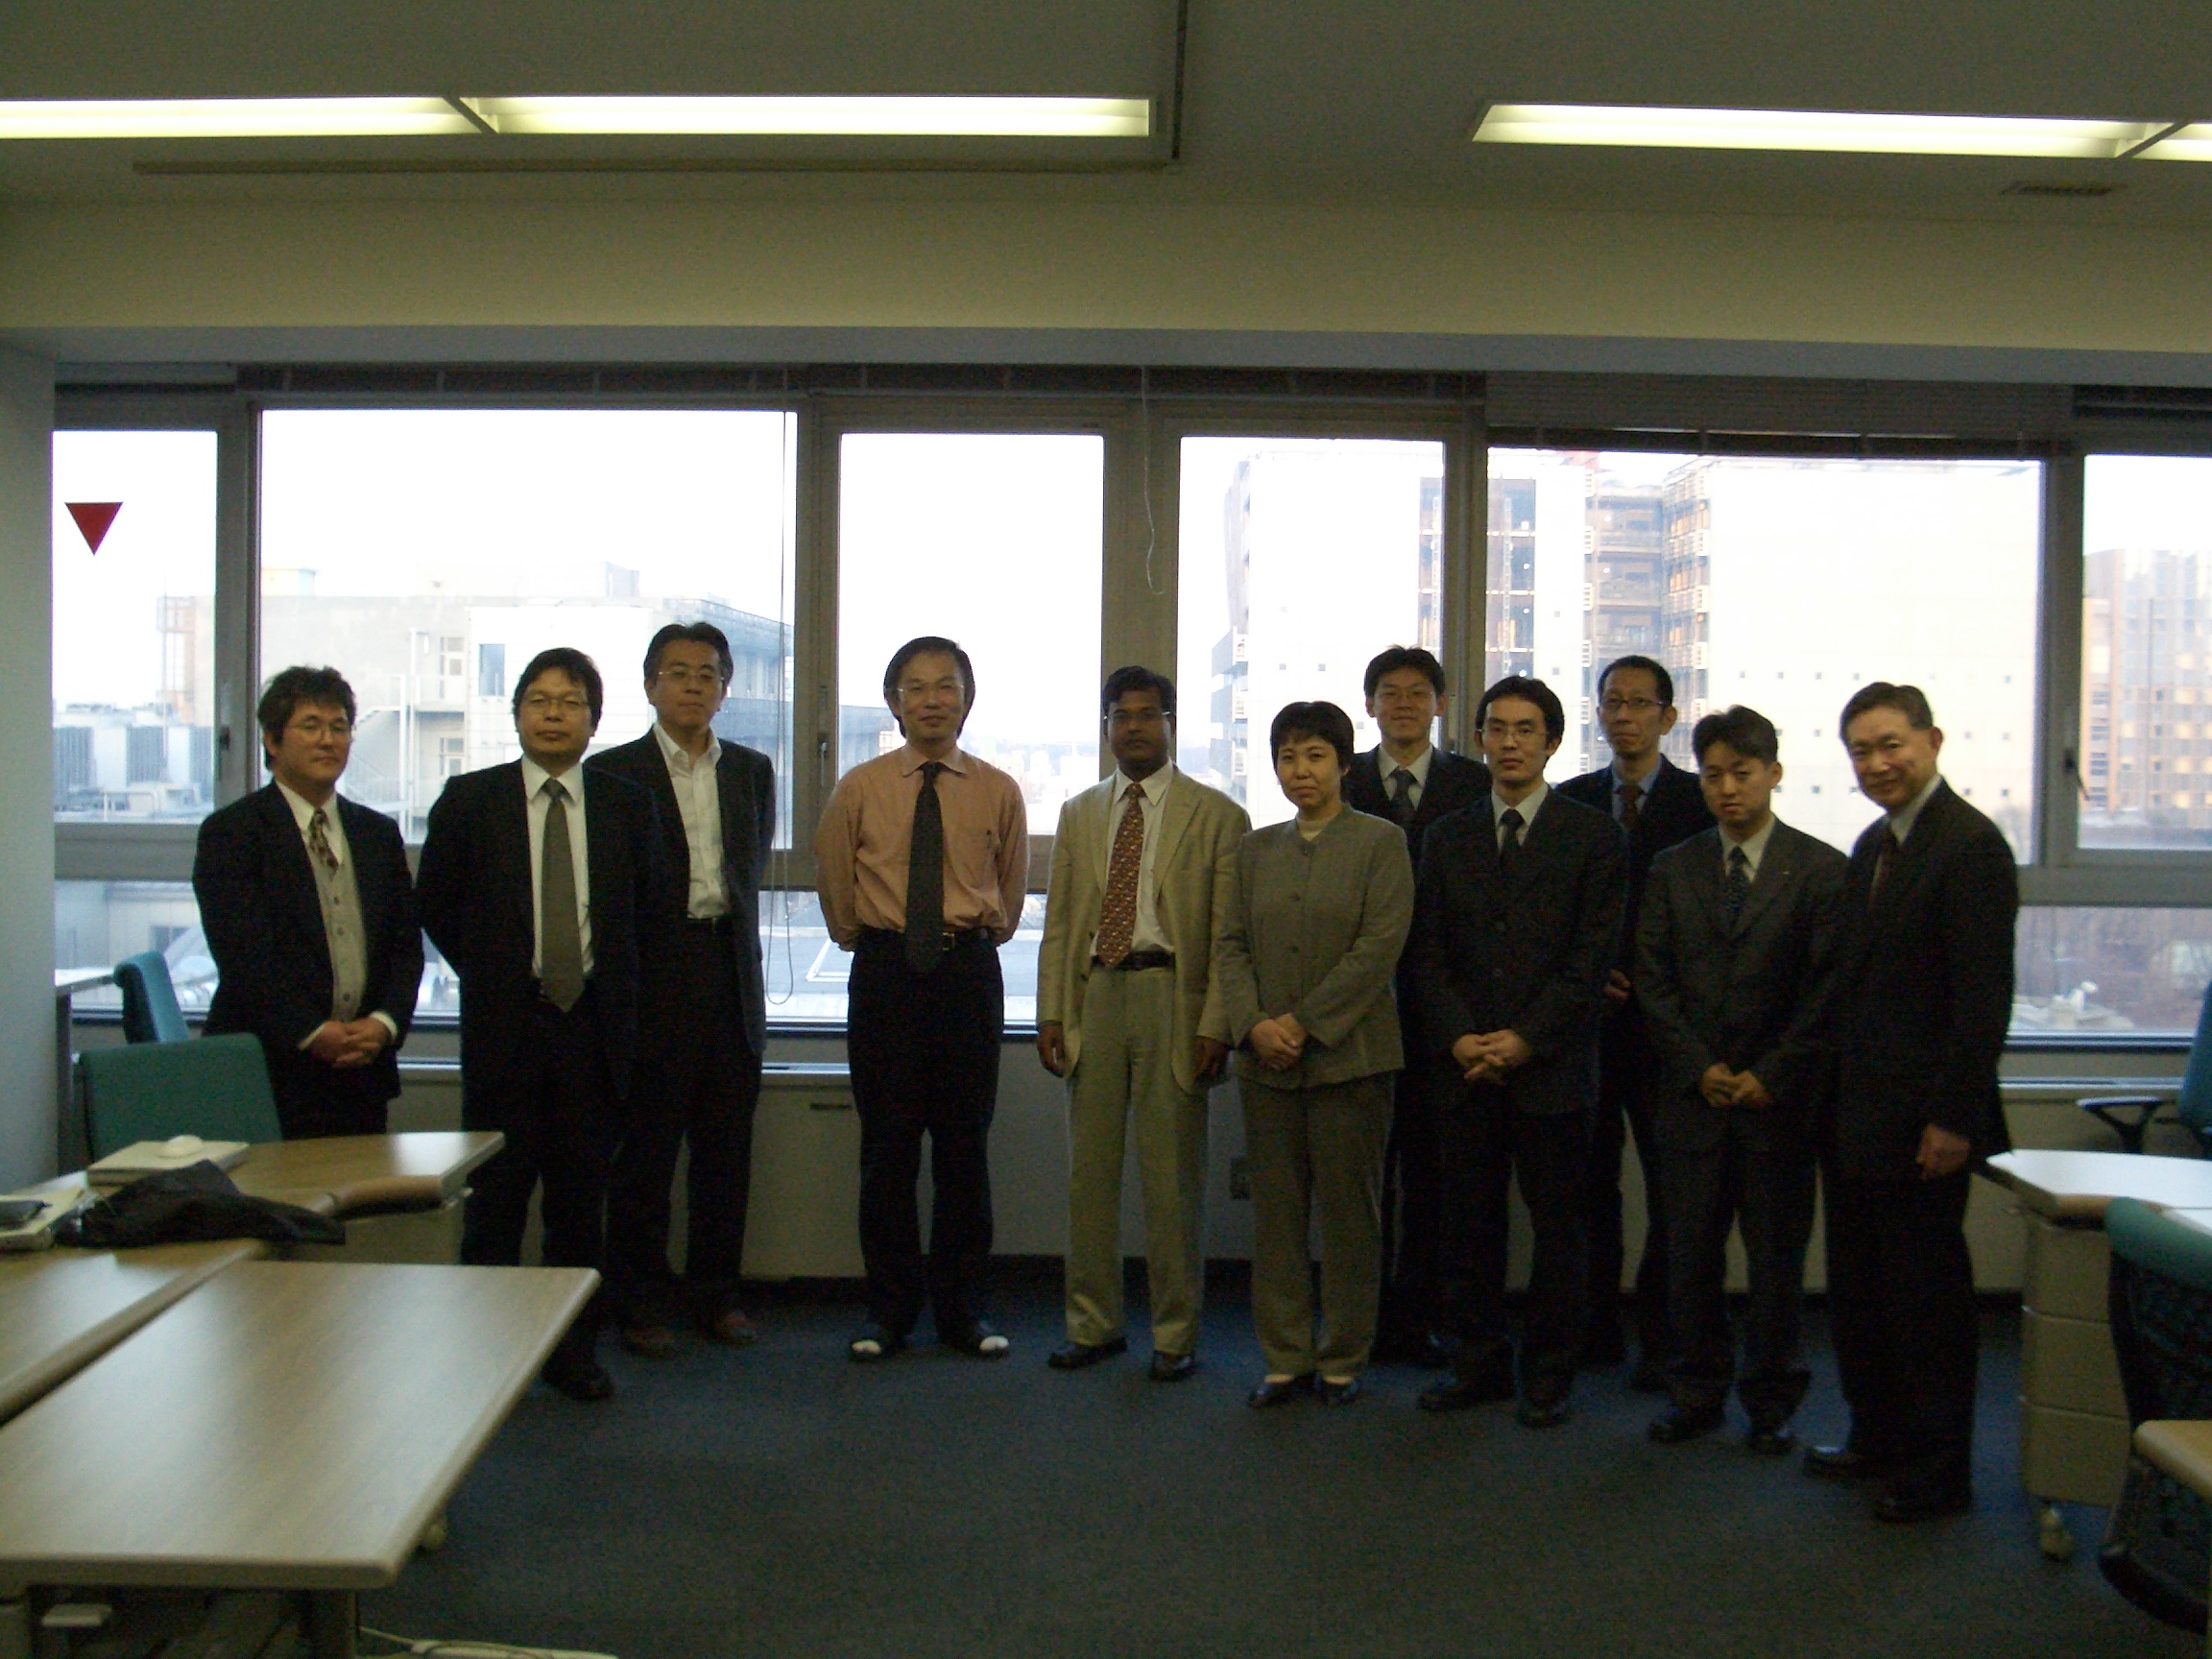 Me and my colleagues at Uni Tokyo